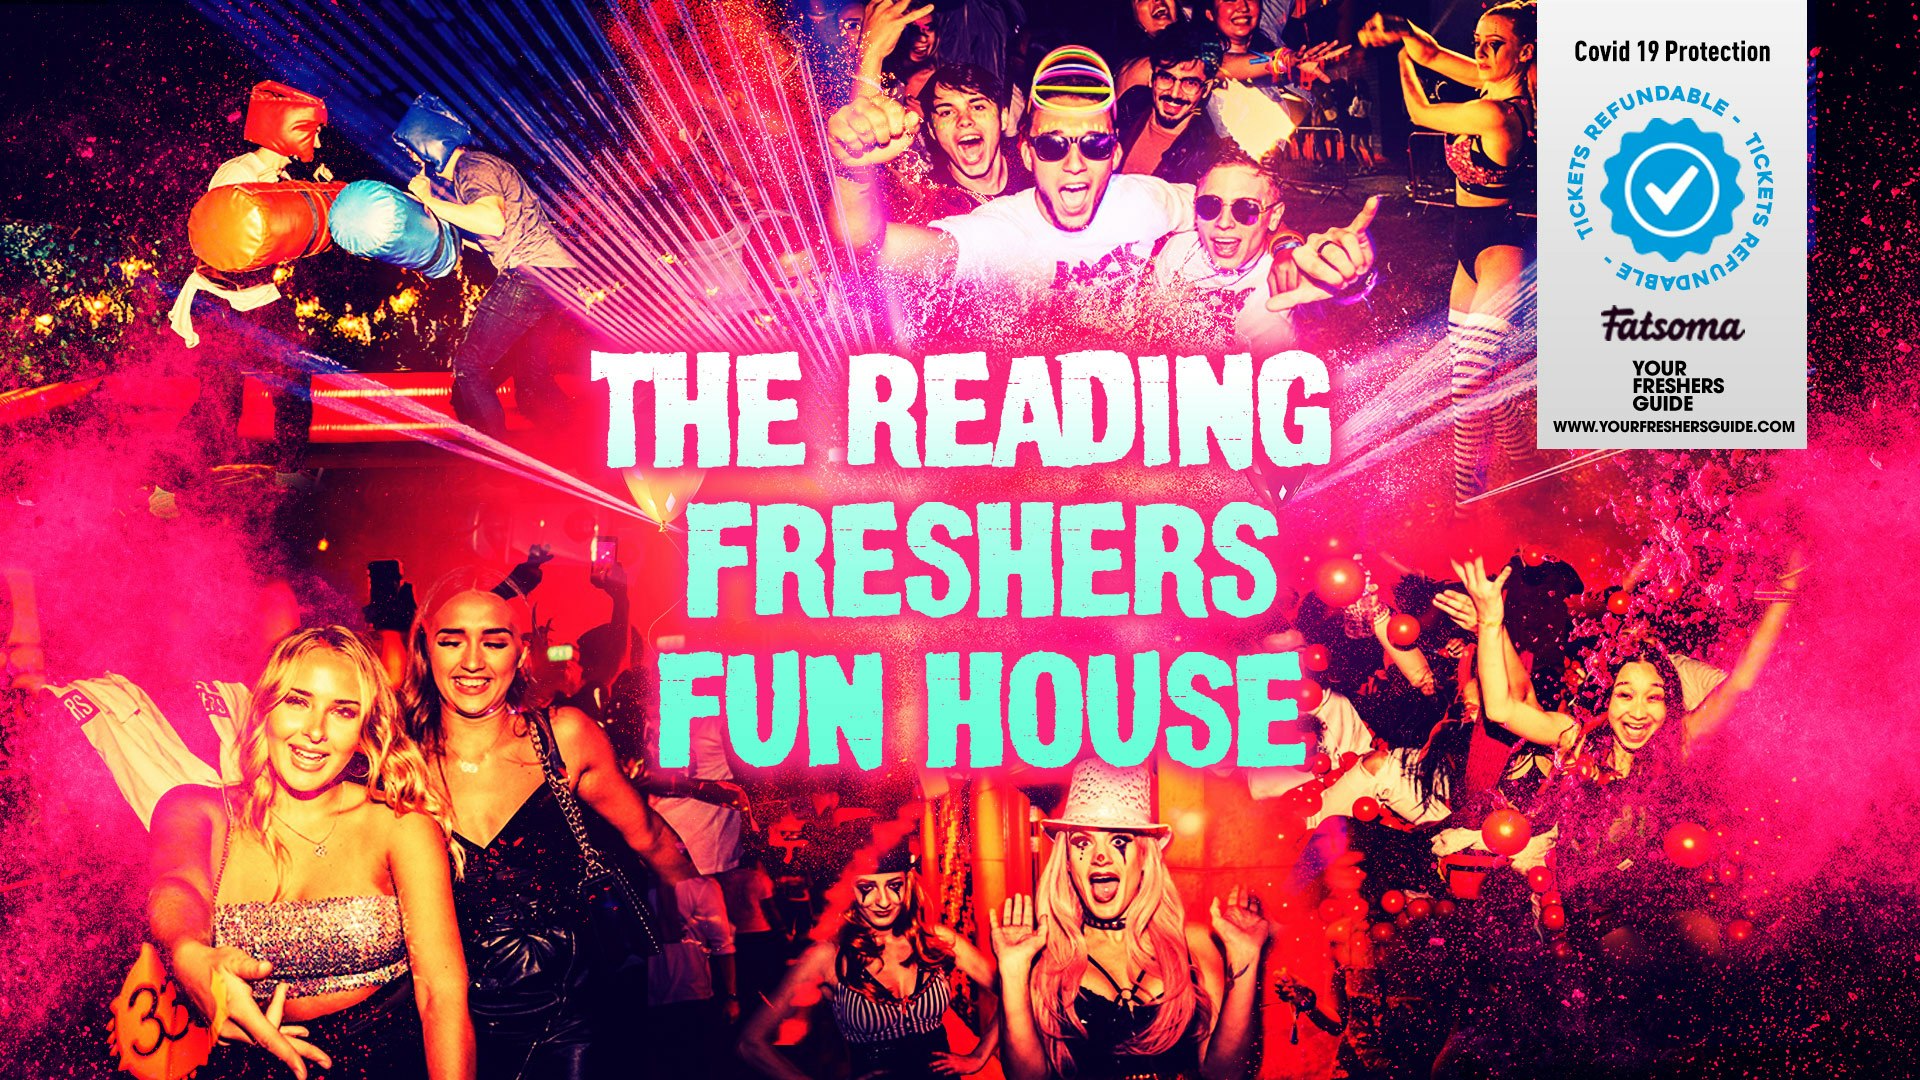 The Freshers Fun House | Reading Freshers 2021 – First 100 Tickets £3!